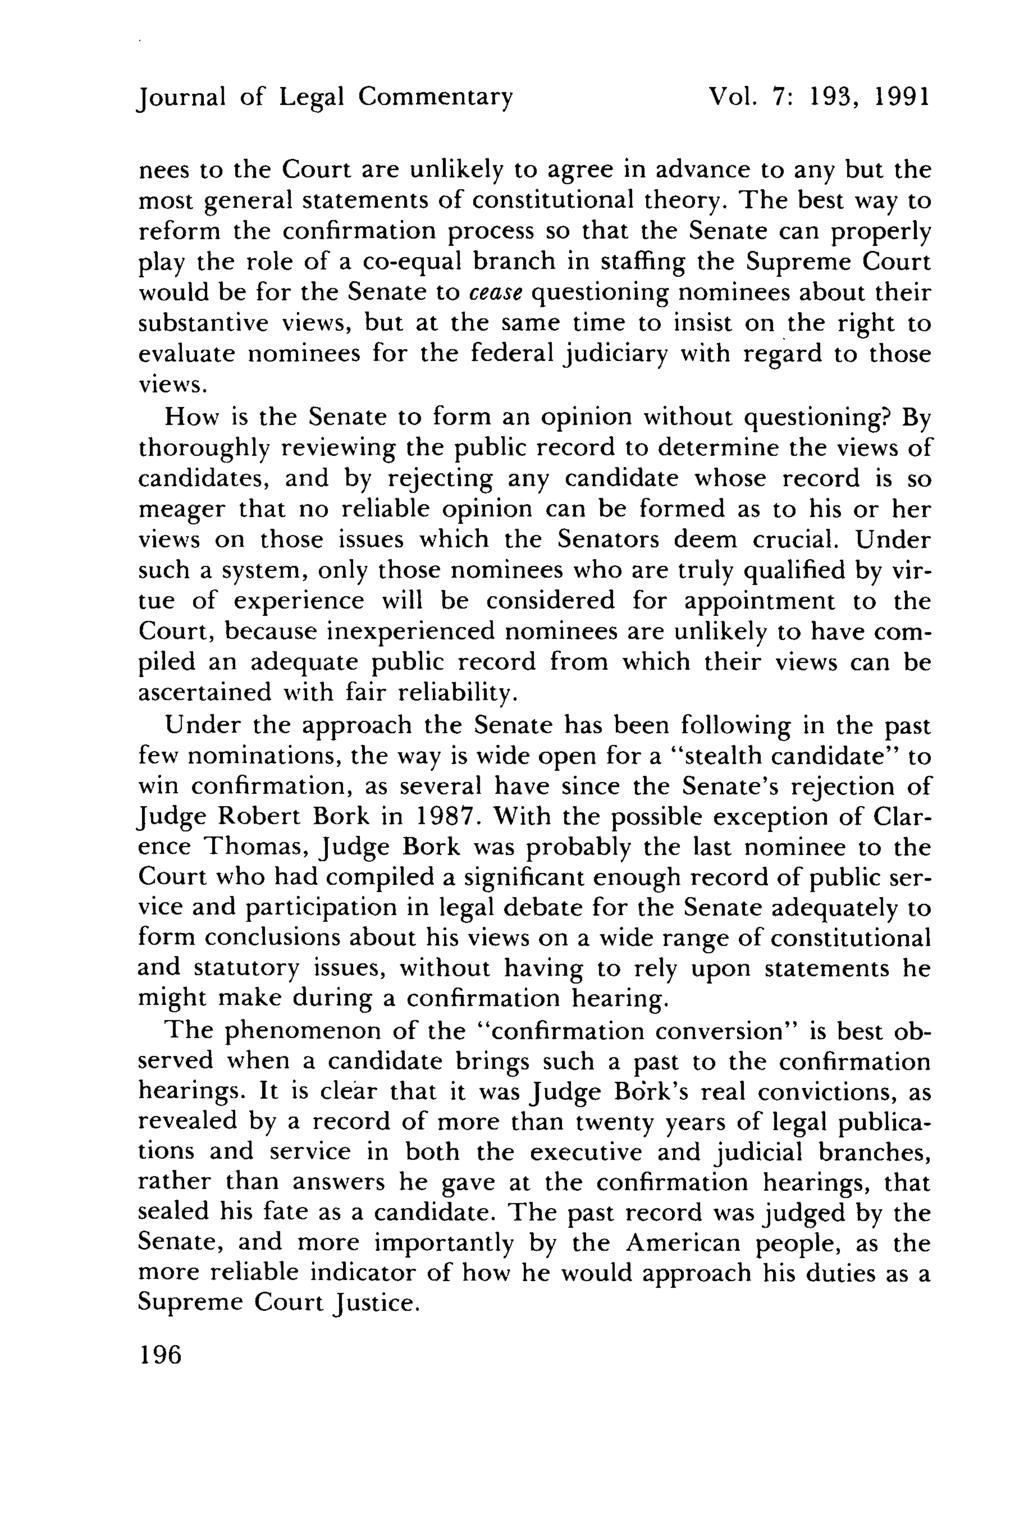 Journal of Legal Commentary Vol. 7: 193, 1991 nees to the Court are unlikely to agree in advance to any but the most general statements of constitutional theory.